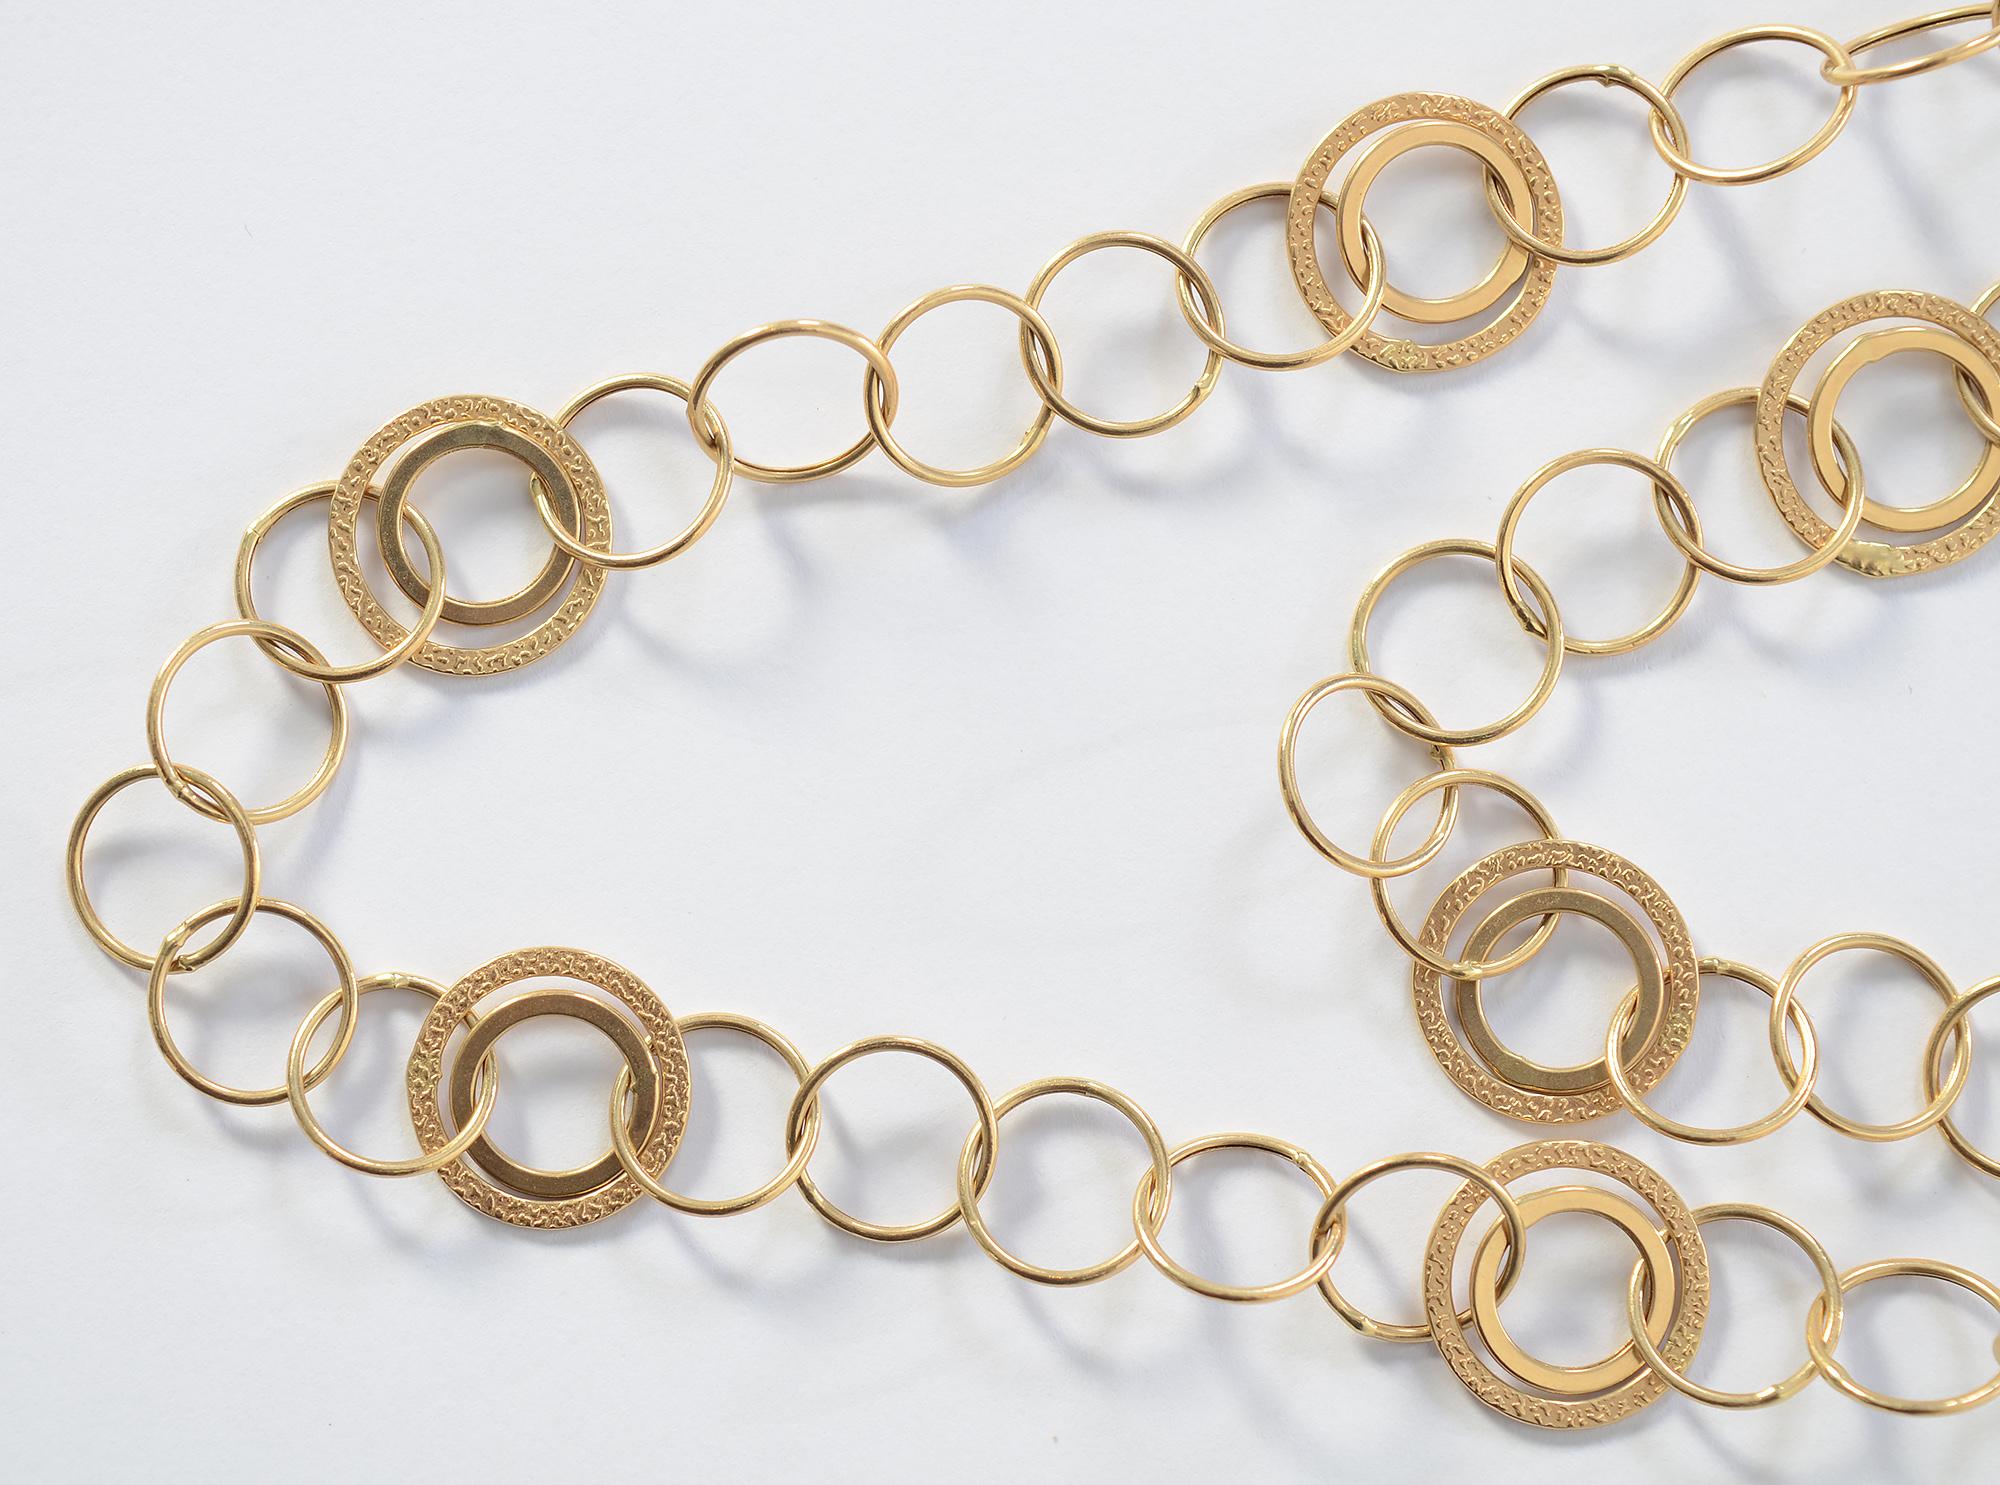 necklace with circles all around